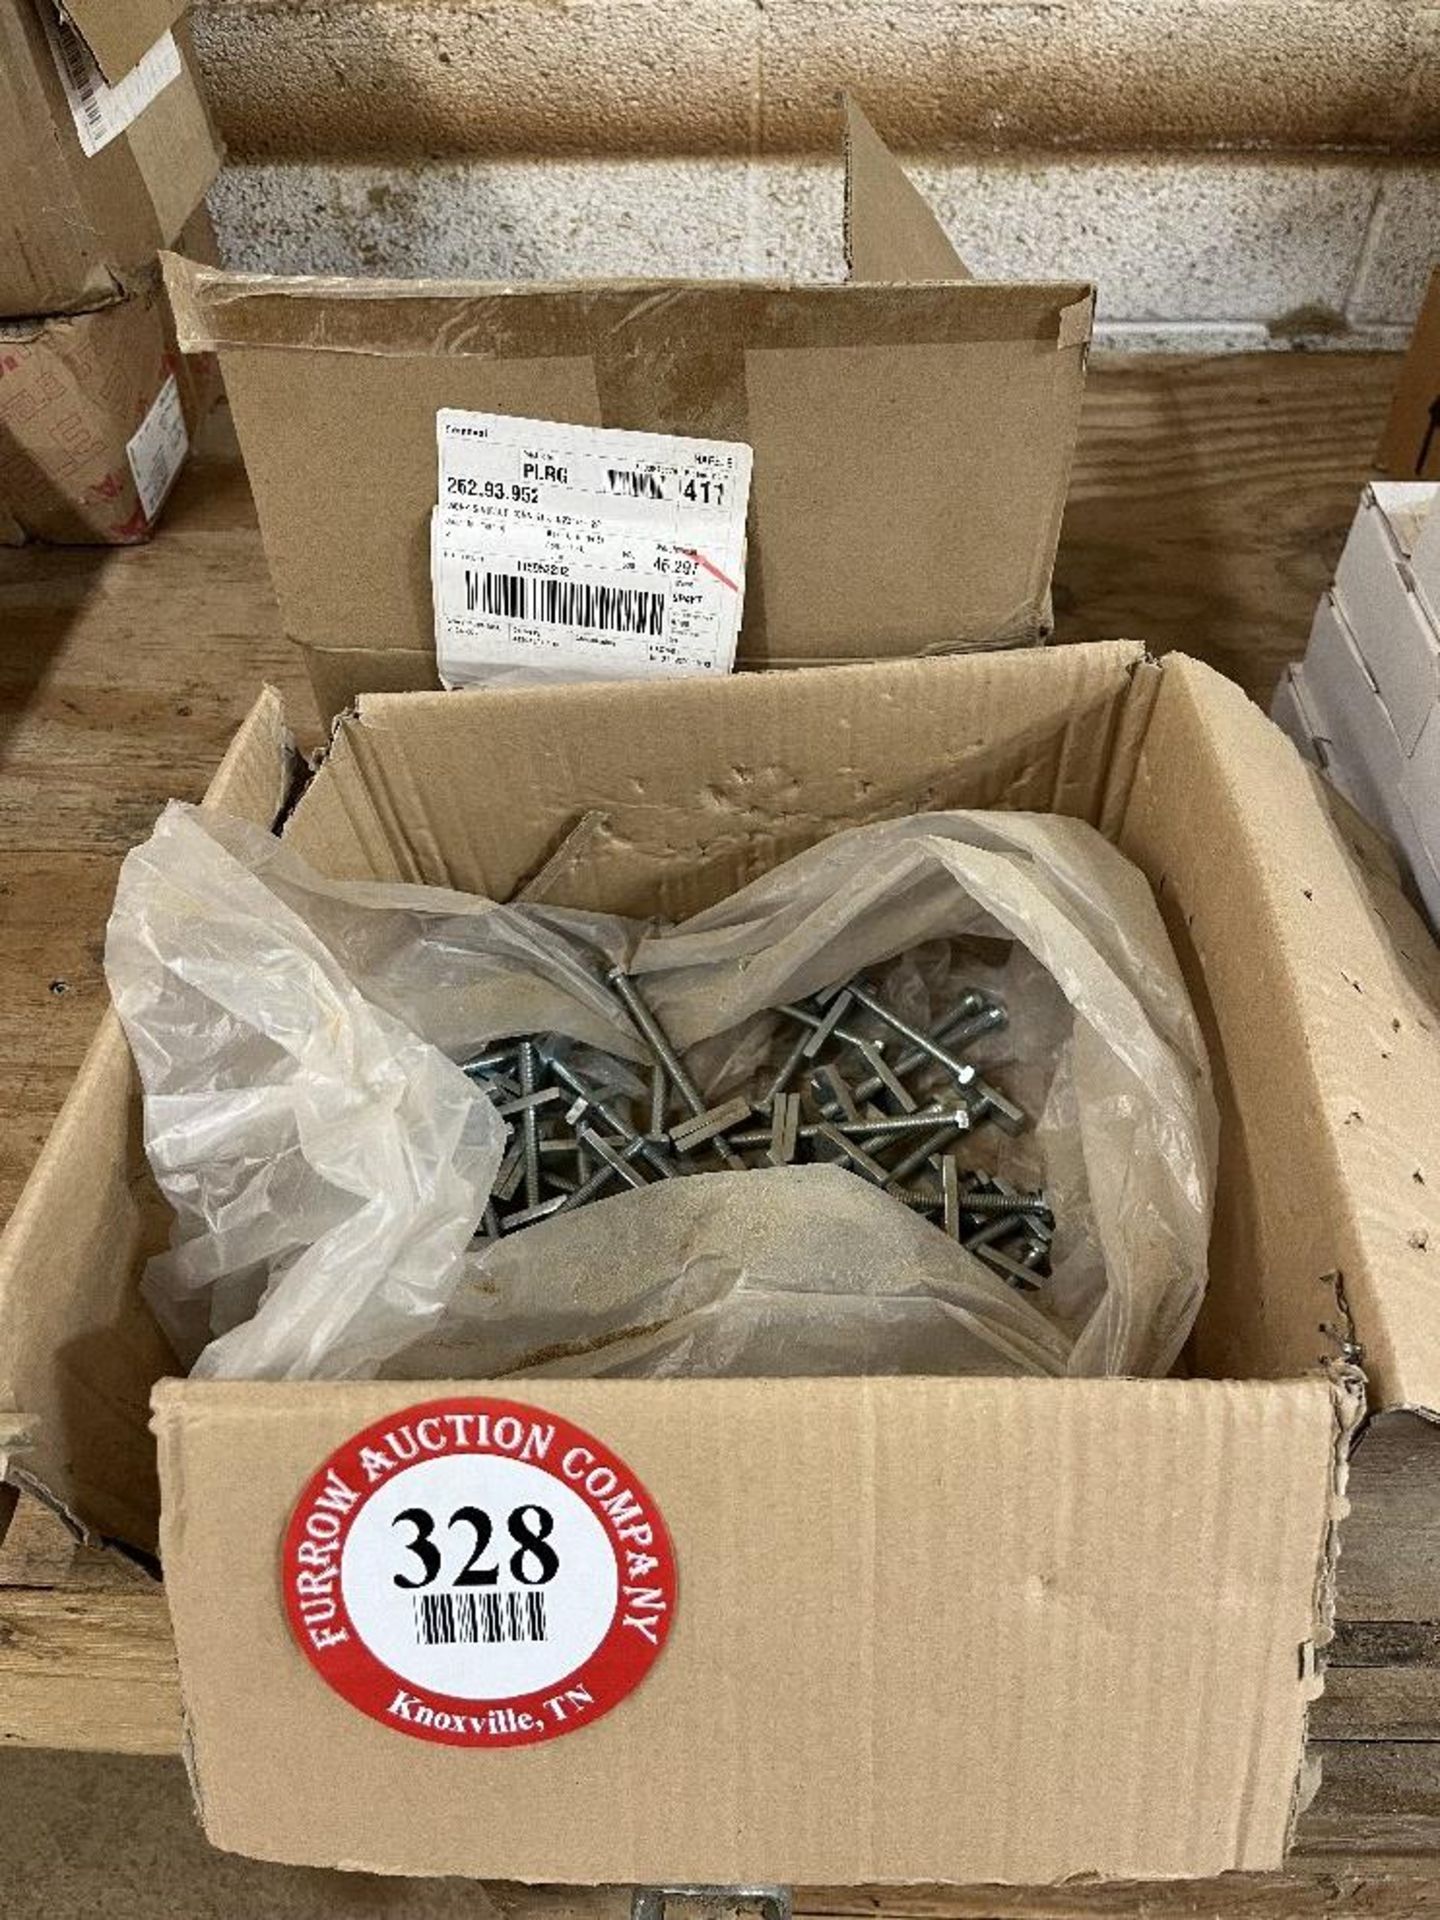 Contents of 2 Boxes of 3.5" Bolts, etc.